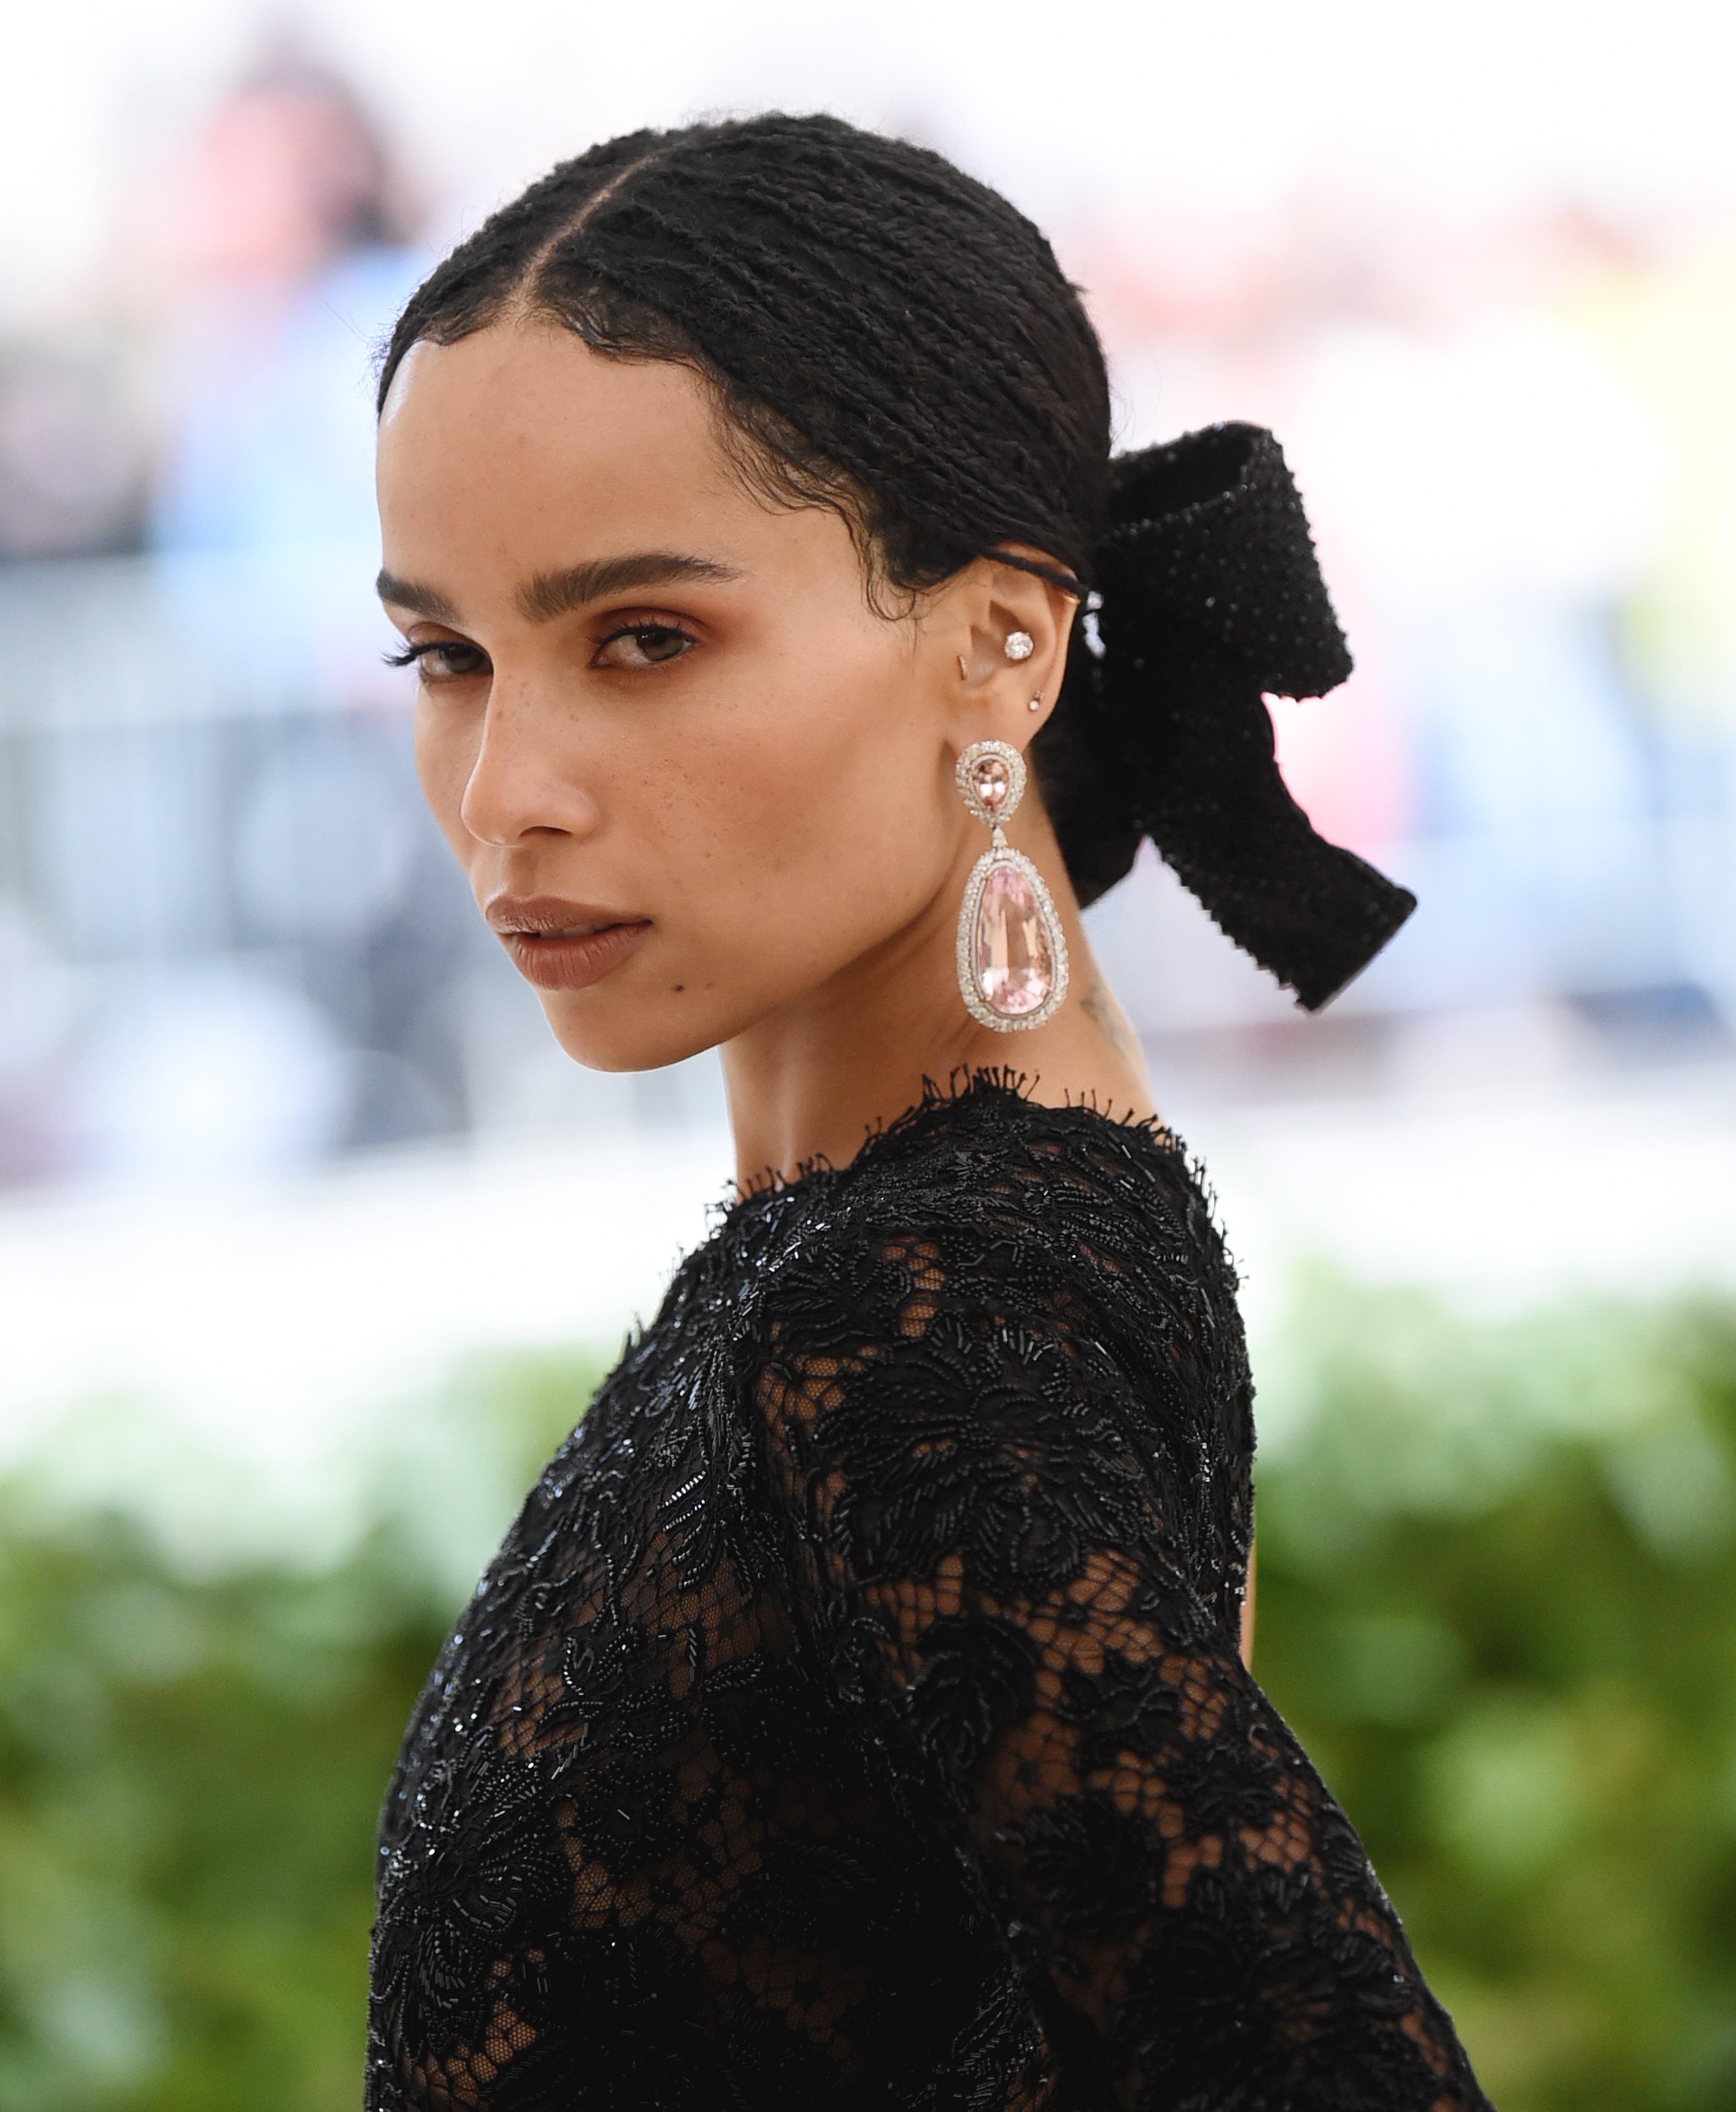 The Hair Ribbon Is Officially This Season's Must-Have Hair